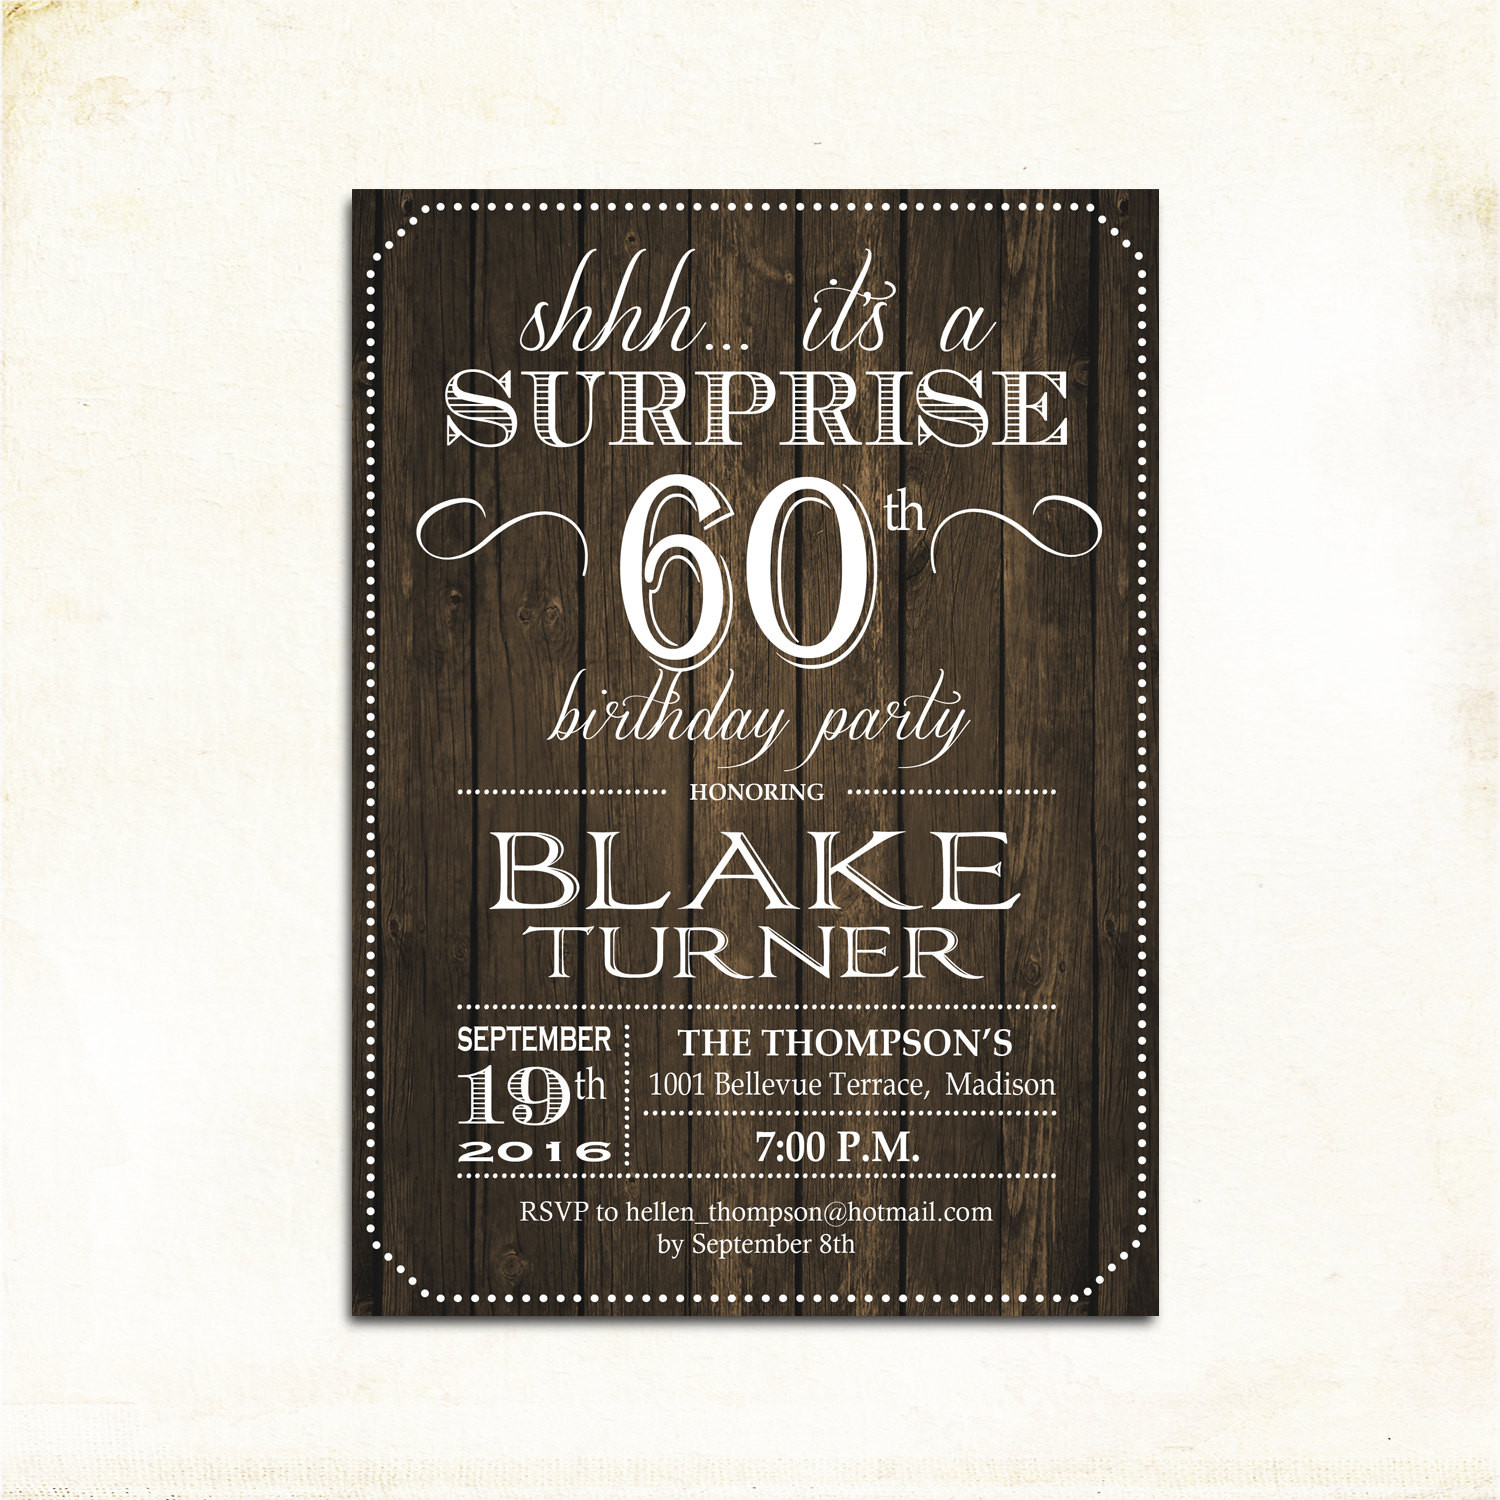 Surprise 60th Birthday Party Invitations
 Surprise 60th Birthday Invitation Any Age Rustic Invite